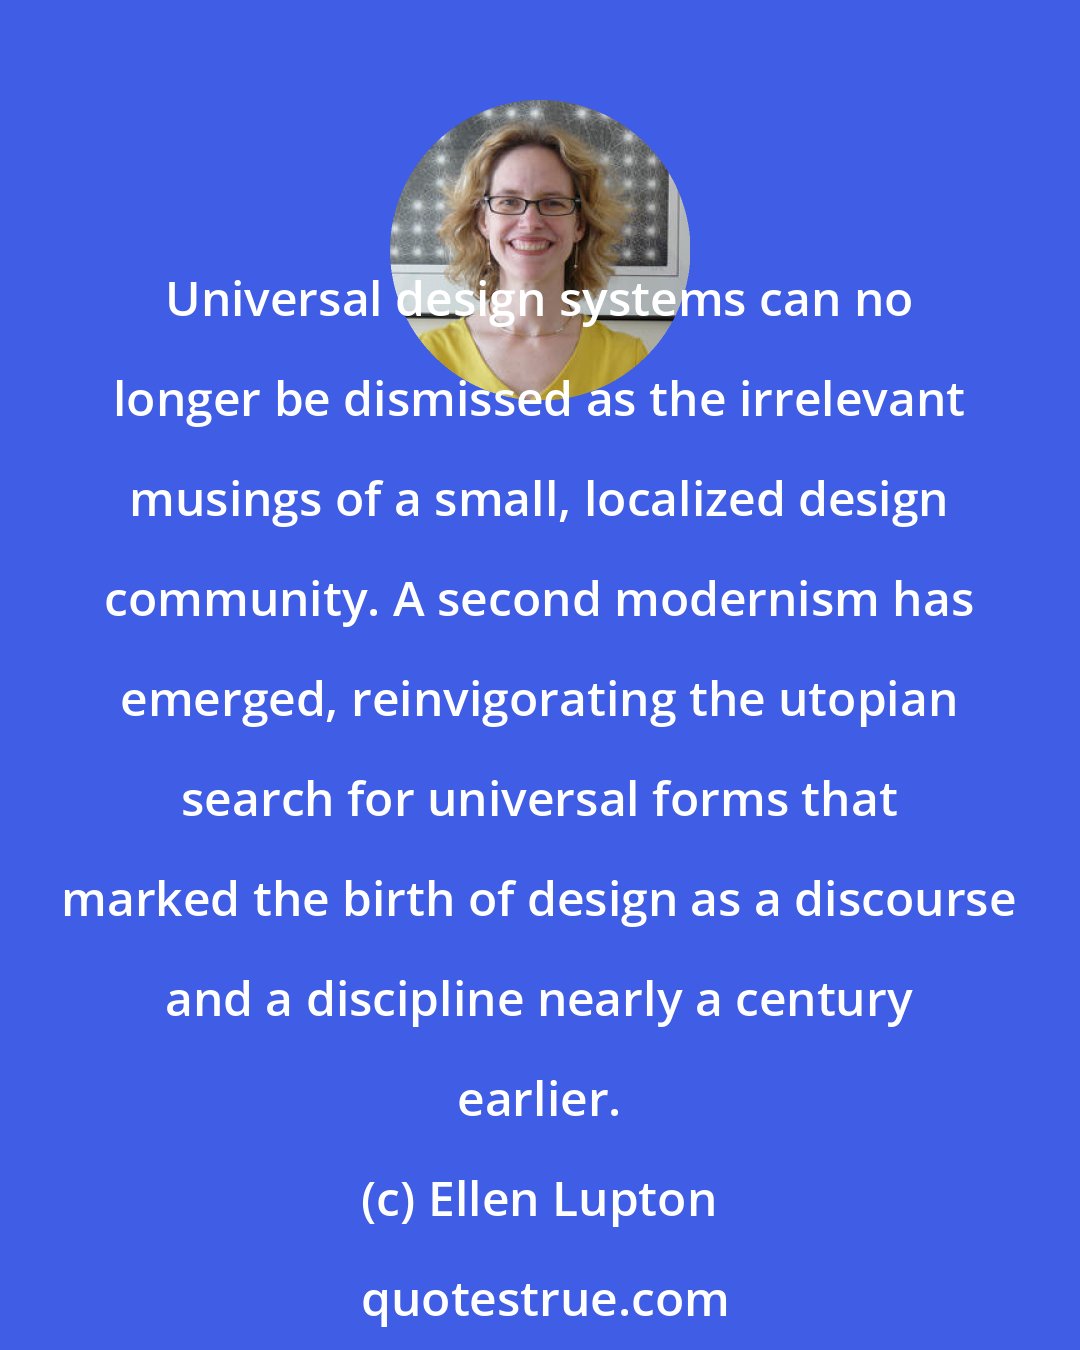 Ellen Lupton: Universal design systems can no longer be dismissed as the irrelevant musings of a small, localized design community. A second modernism has emerged, reinvigorating the utopian search for universal forms that marked the birth of design as a discourse and a discipline nearly a century earlier.